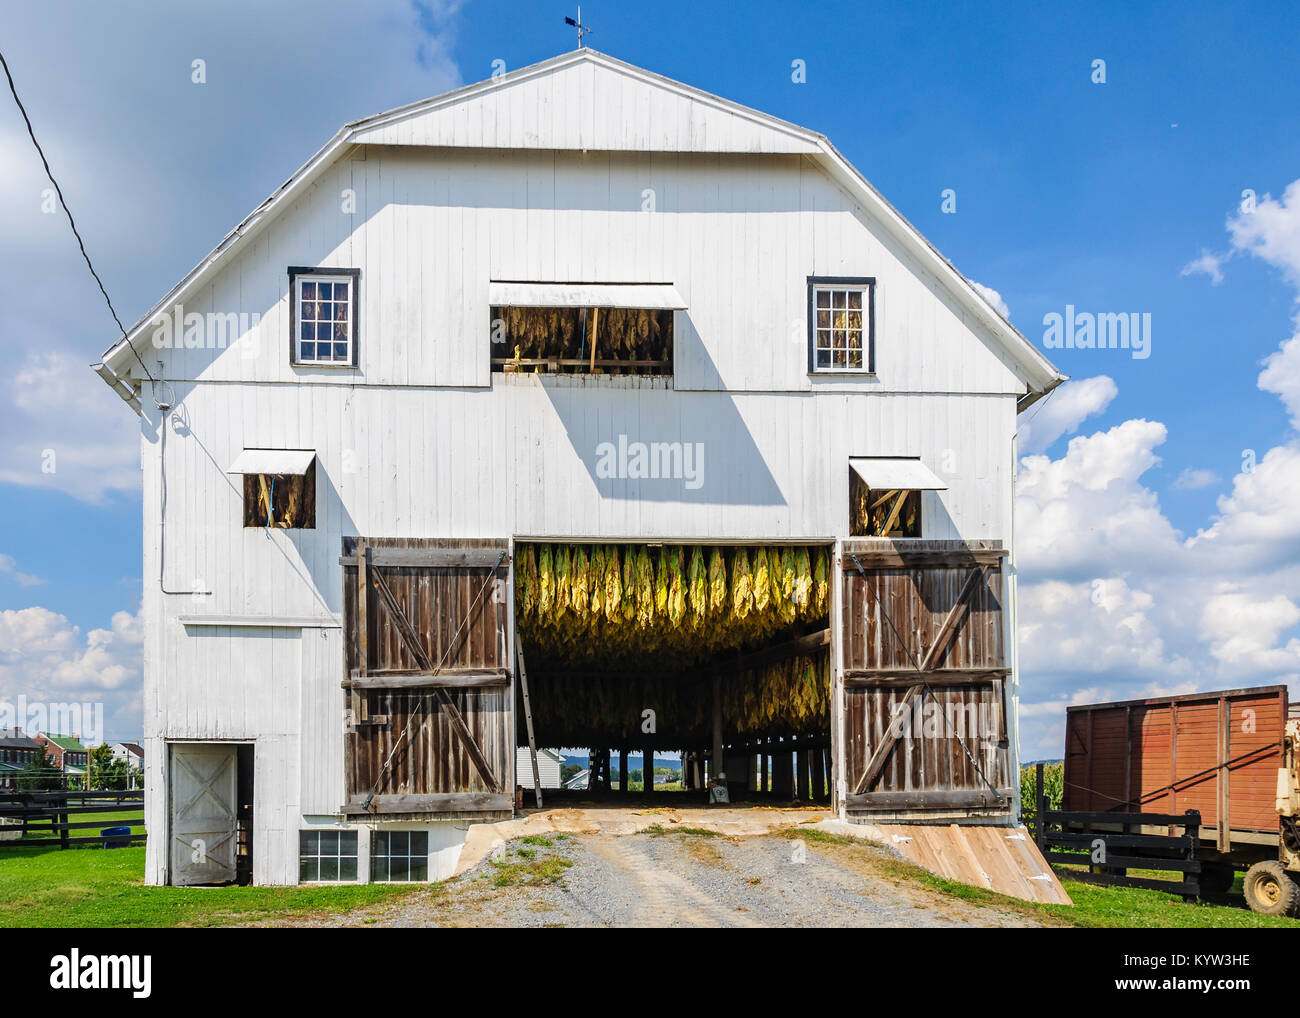 Storing tobacco plants in Amish Country in Pennsylvania, USA Stock Photo